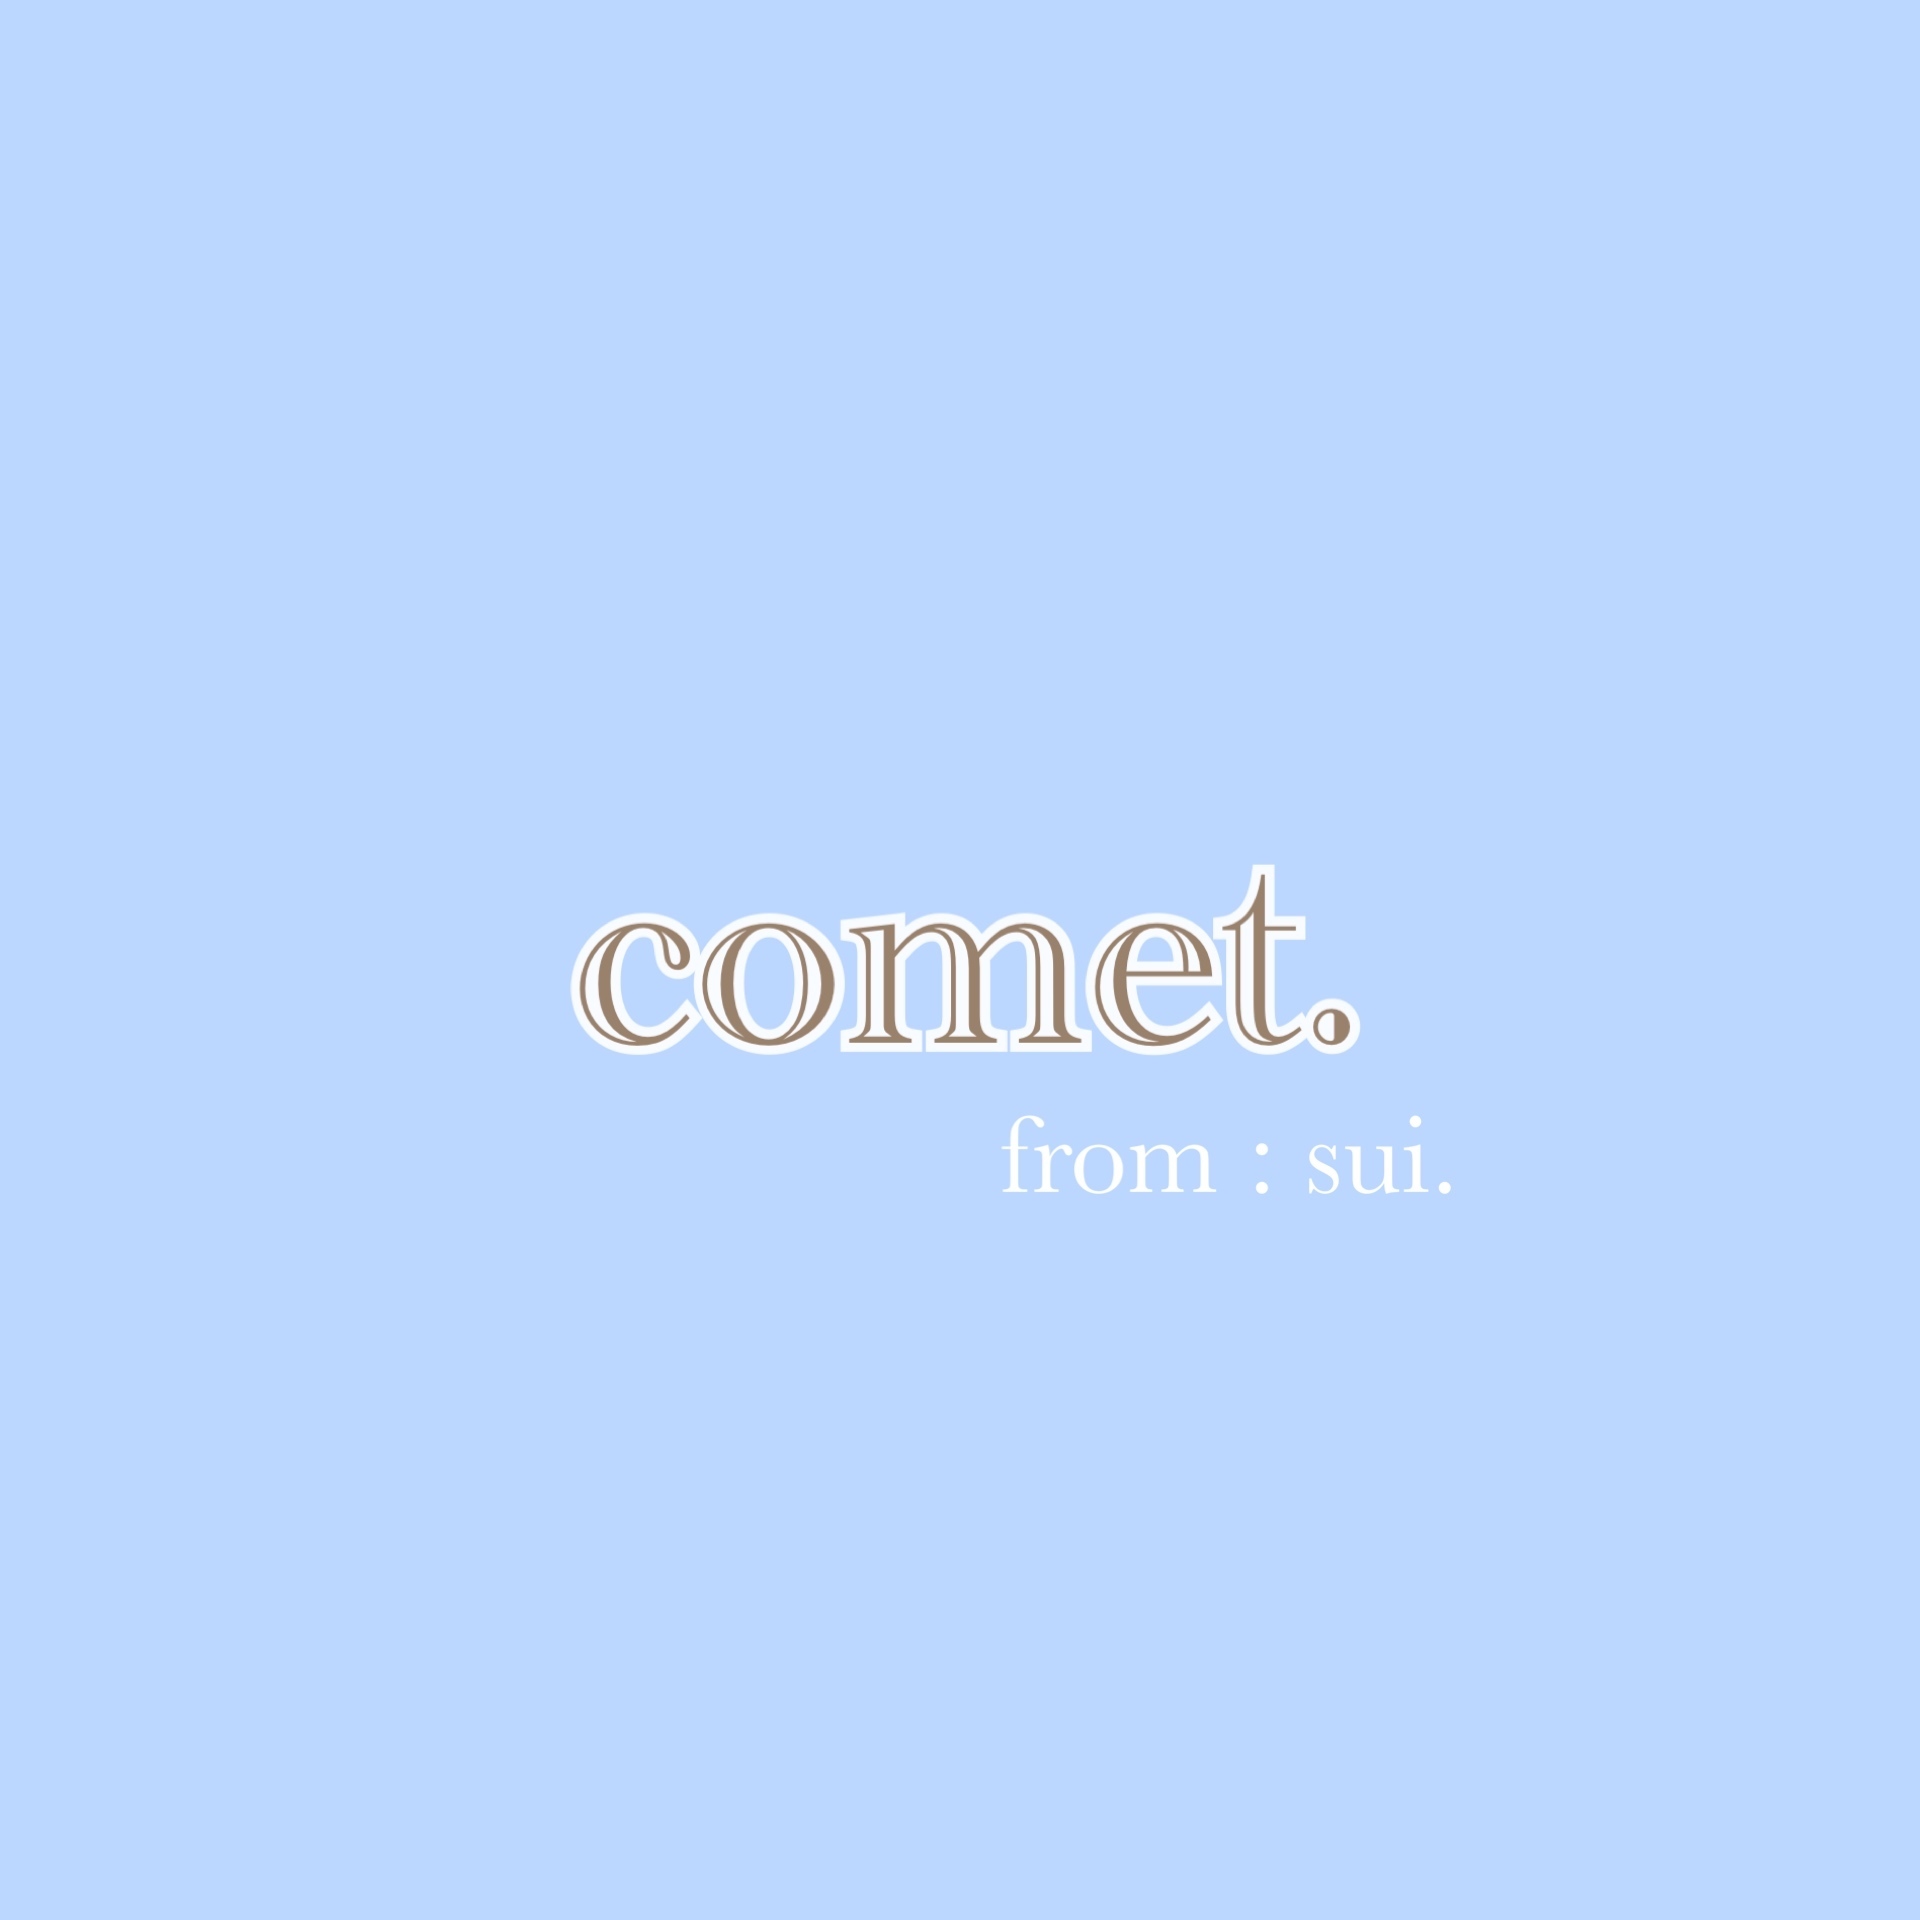 comet. from : sui.